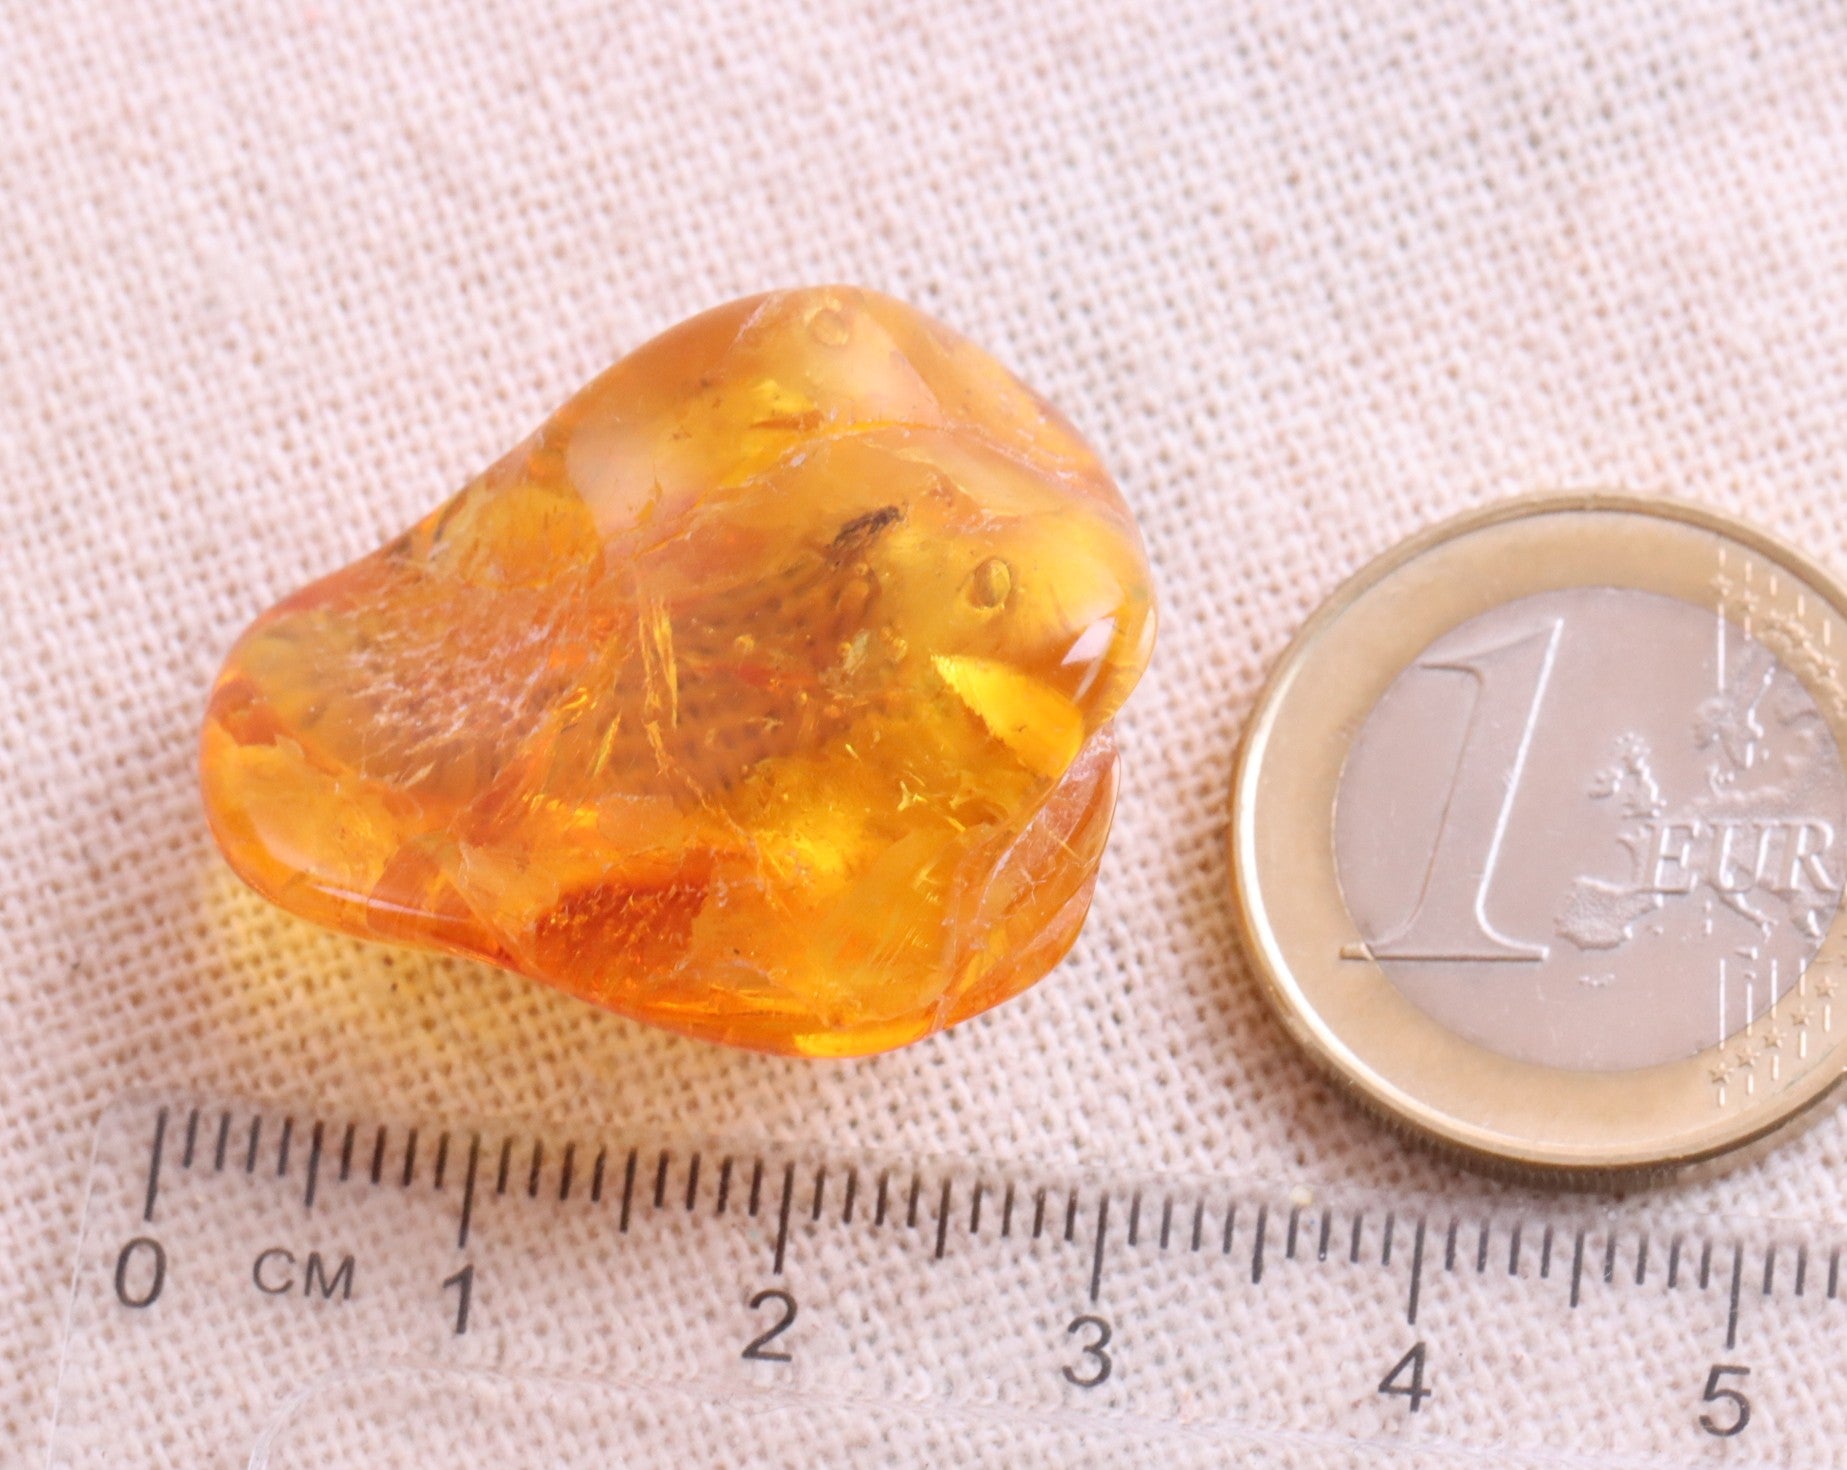 40 million year old Amber With Fly